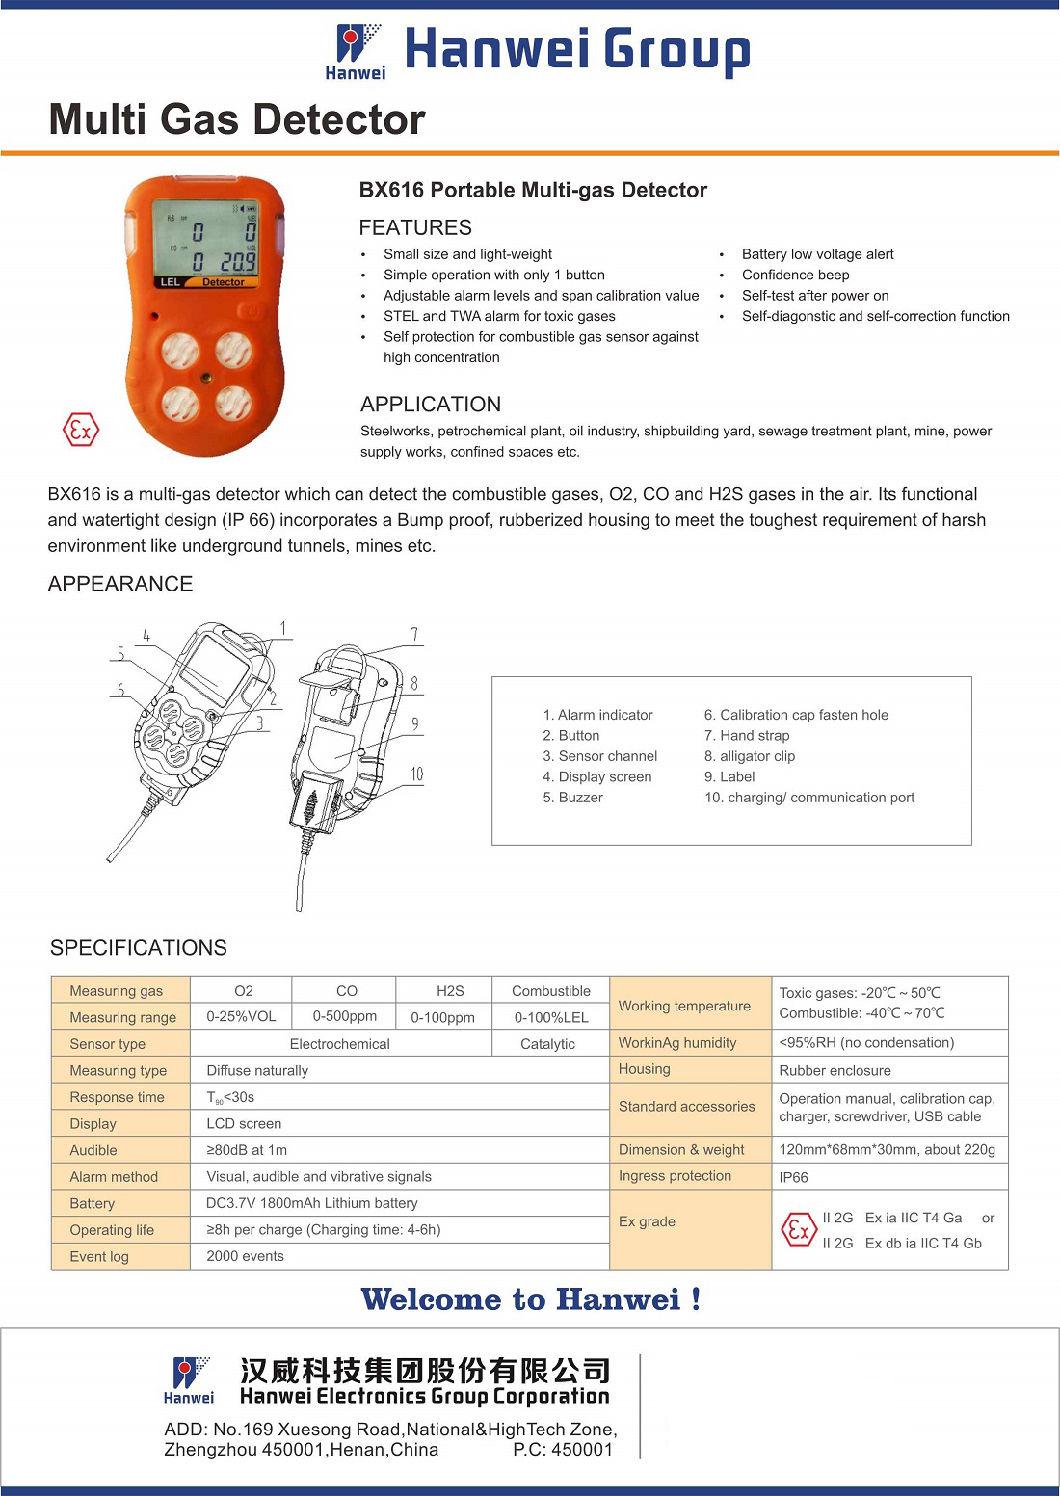 Bx616 4-in-1 Portable Gas Detector Outdoor/Indoor Electrochemical/Catalytic Sensor H2s/Co/O2/CH4